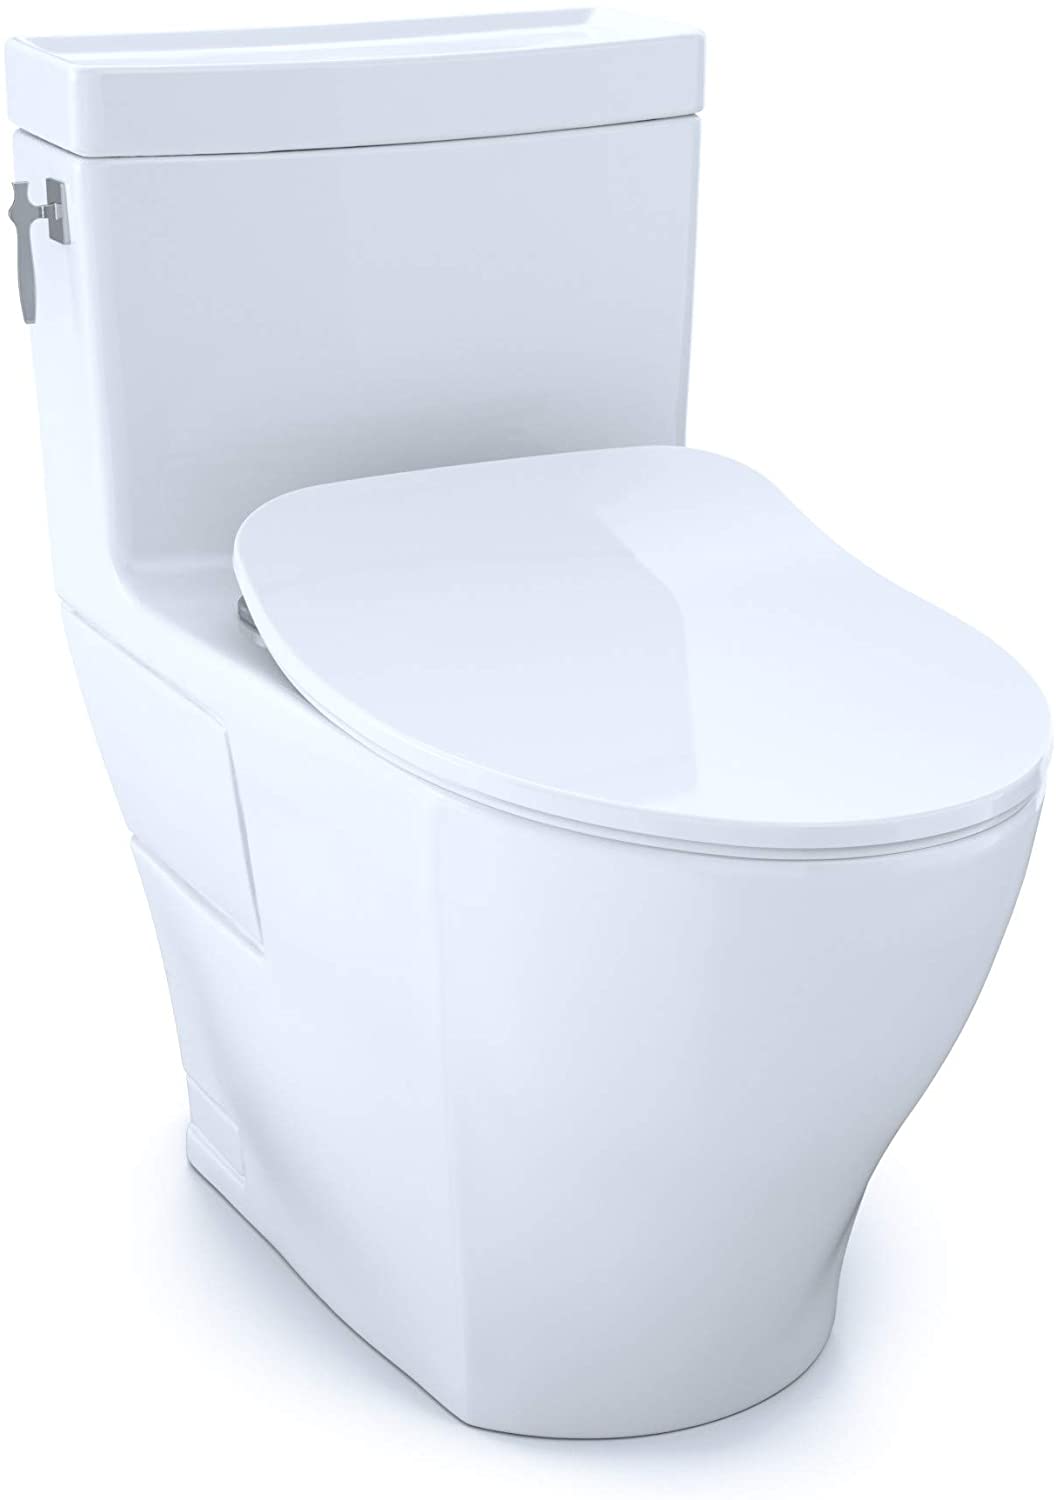 Toto MS626234CEFG#01 - Aimes One-Piece Elongated 1.28 GPF Toilet with CEFIONTECT and SoftClose Seat,